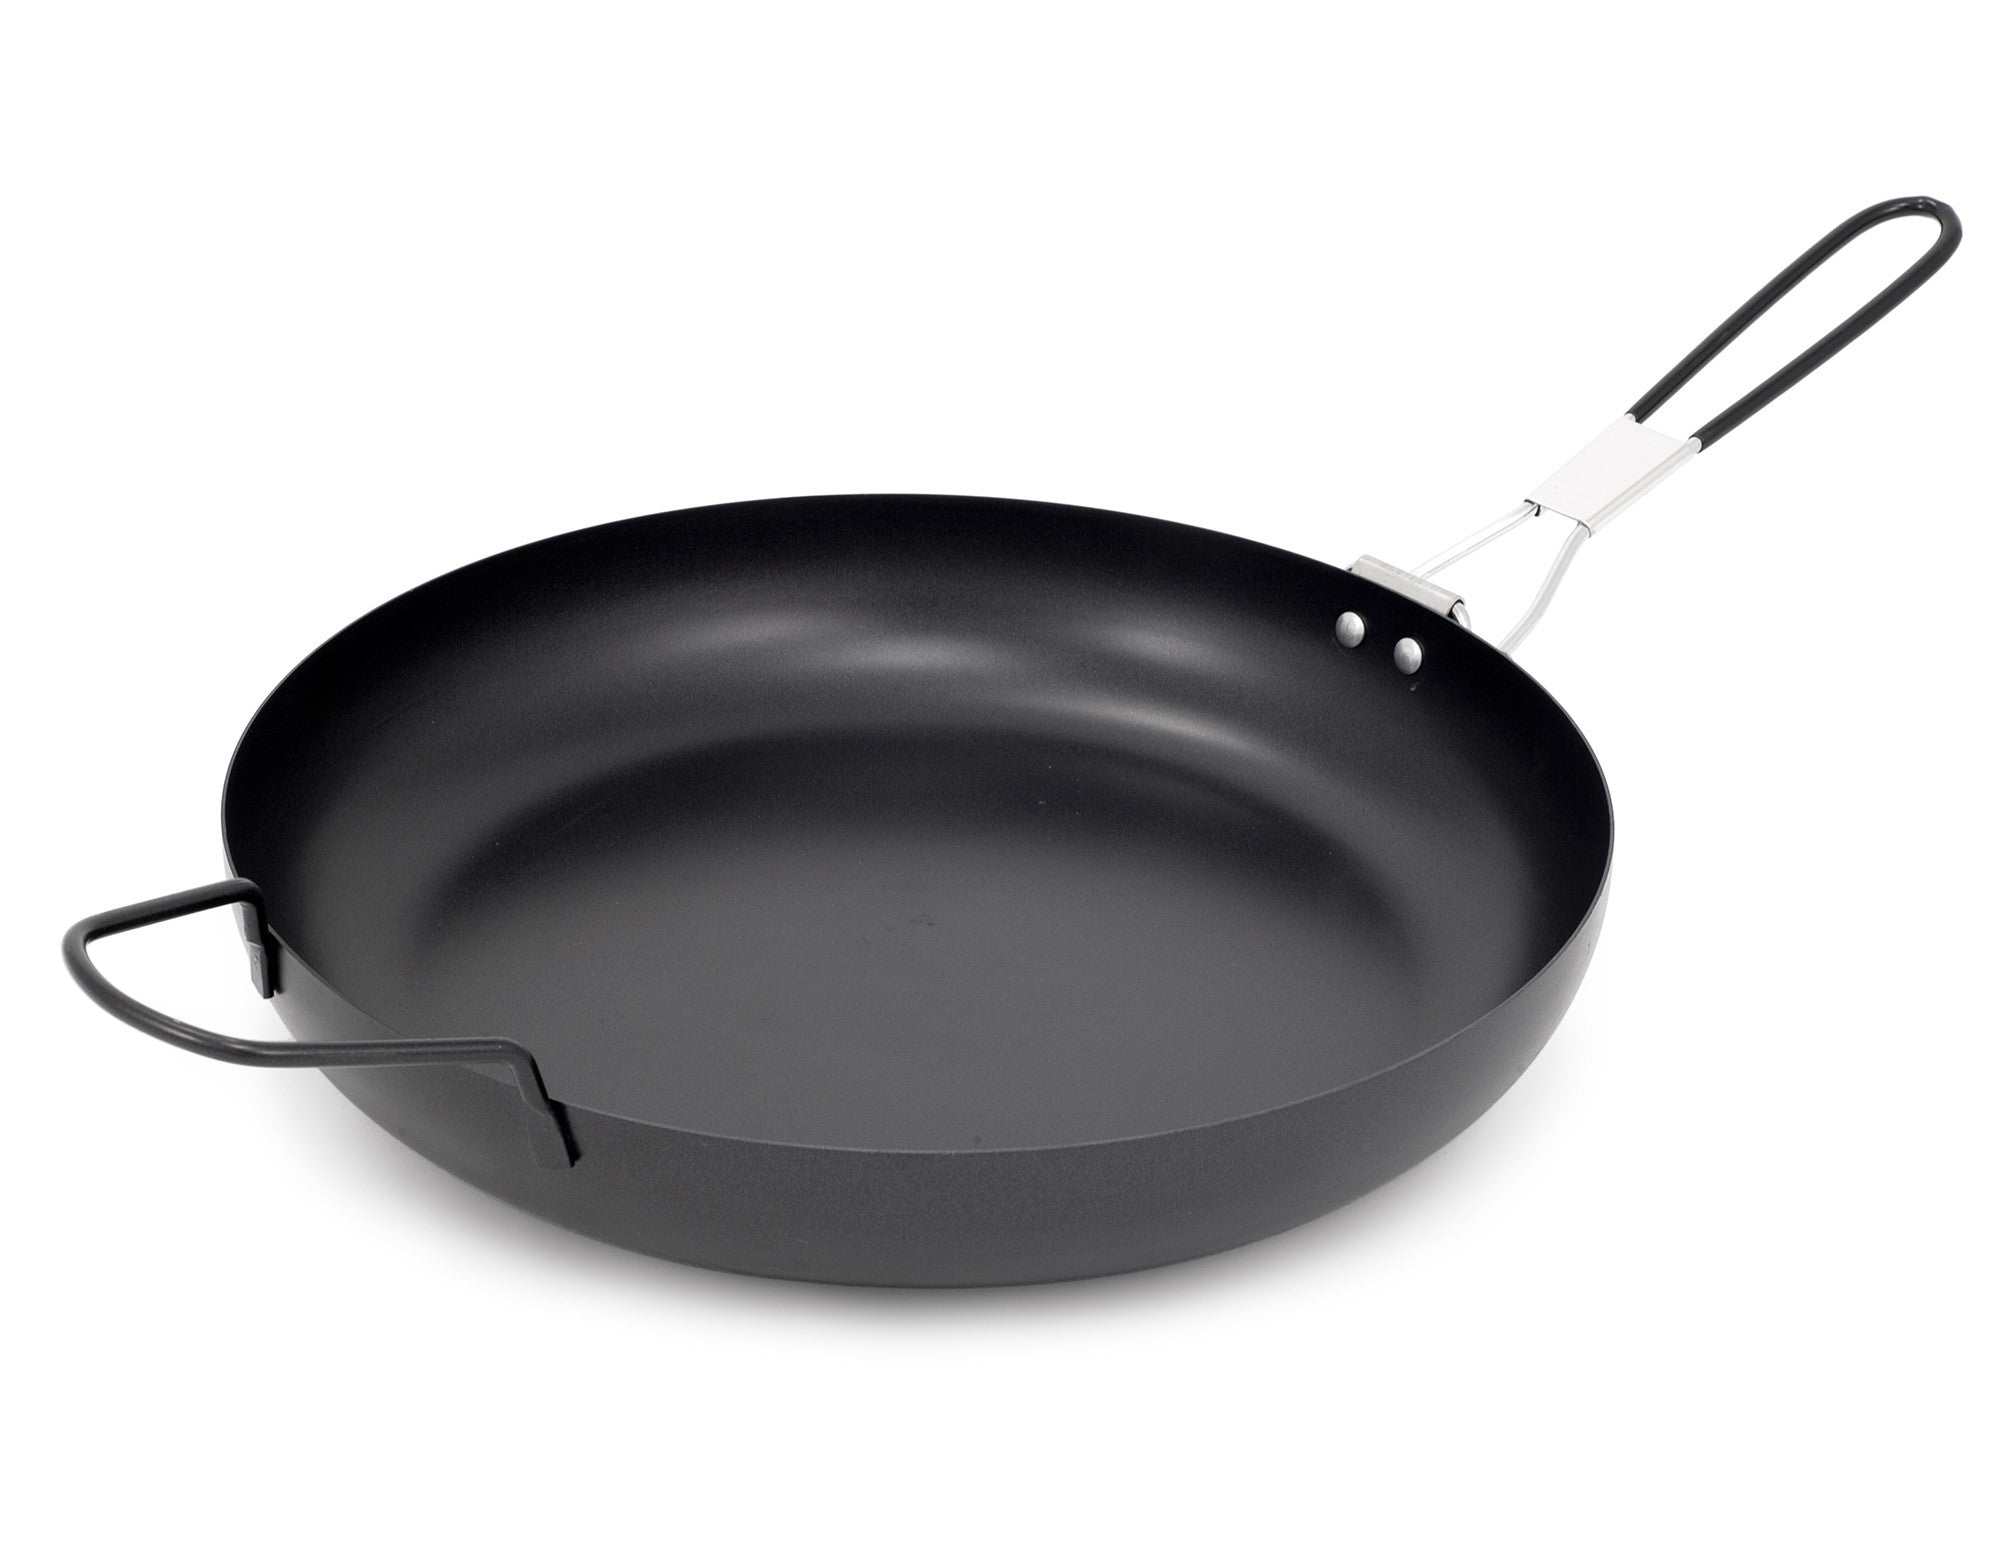 Mr. Outdoors Cookout 8.25 Stainless Steel Fry Pan with Folding Handle